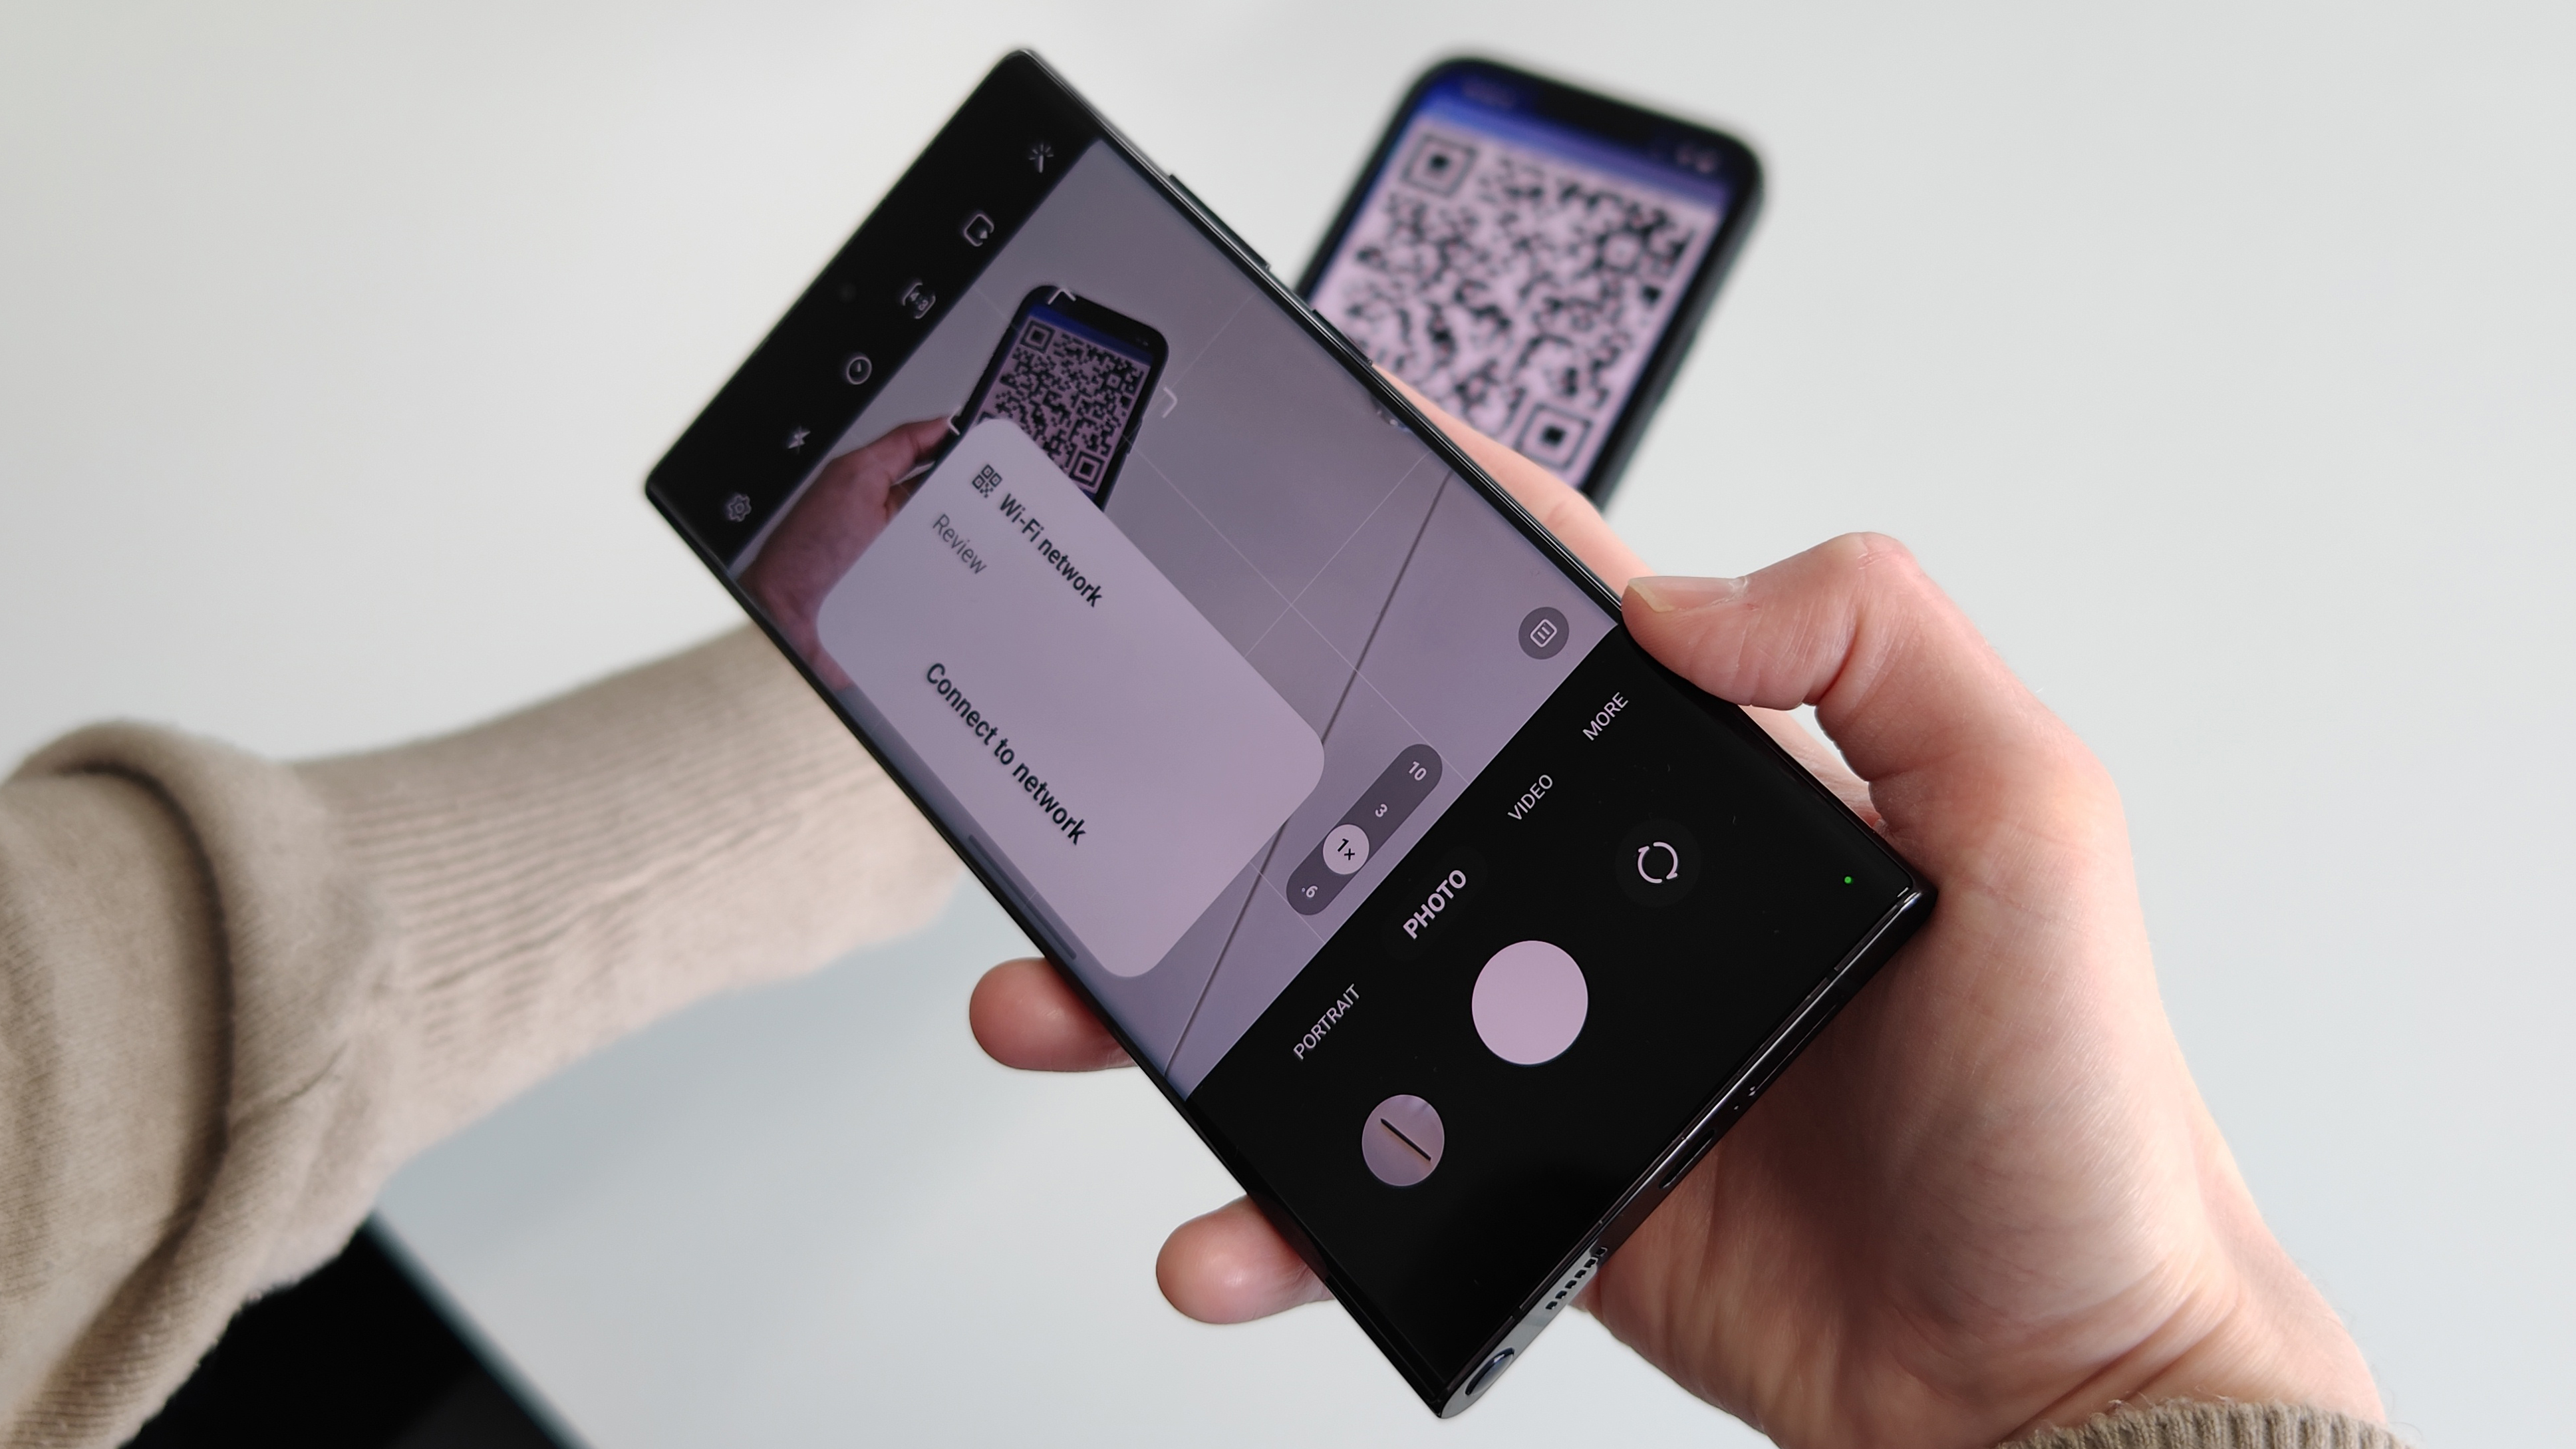 A Samsung Galaxy S22 Ultra scanning a Wi-Fi QR code from an iPhone 13 Pro Max